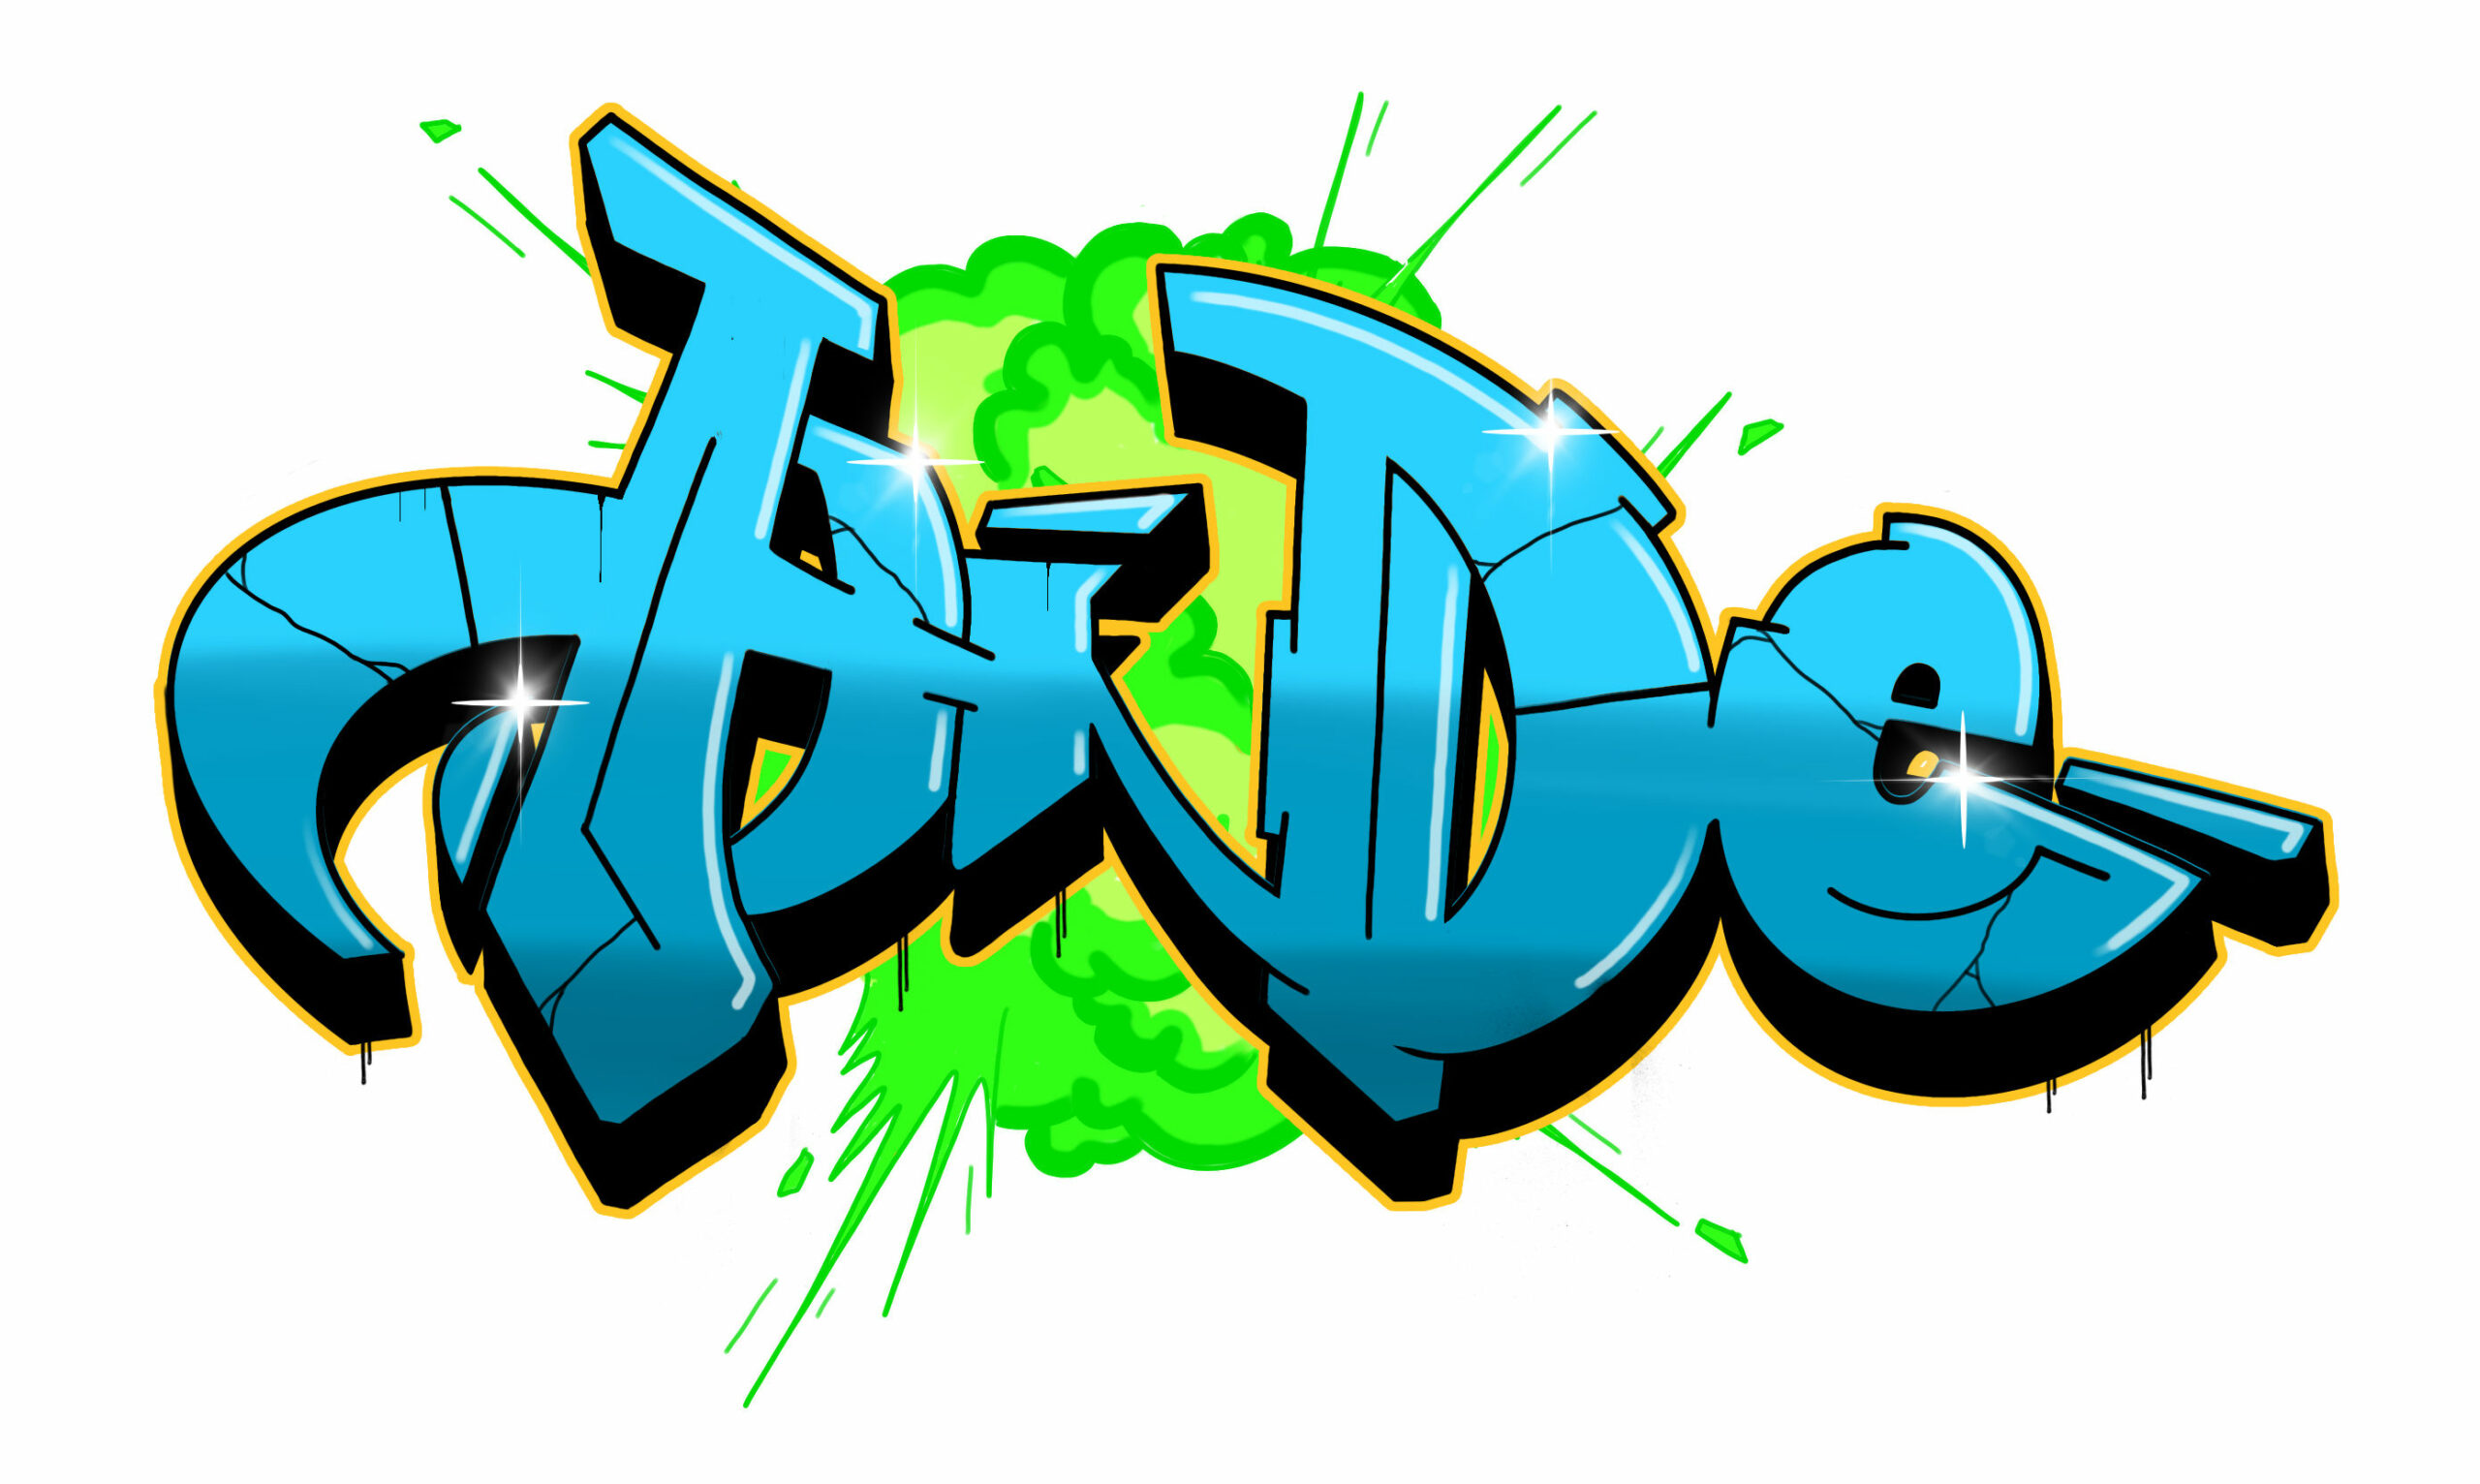 How to Draw “Hide” in Graffiti in 13 Steps